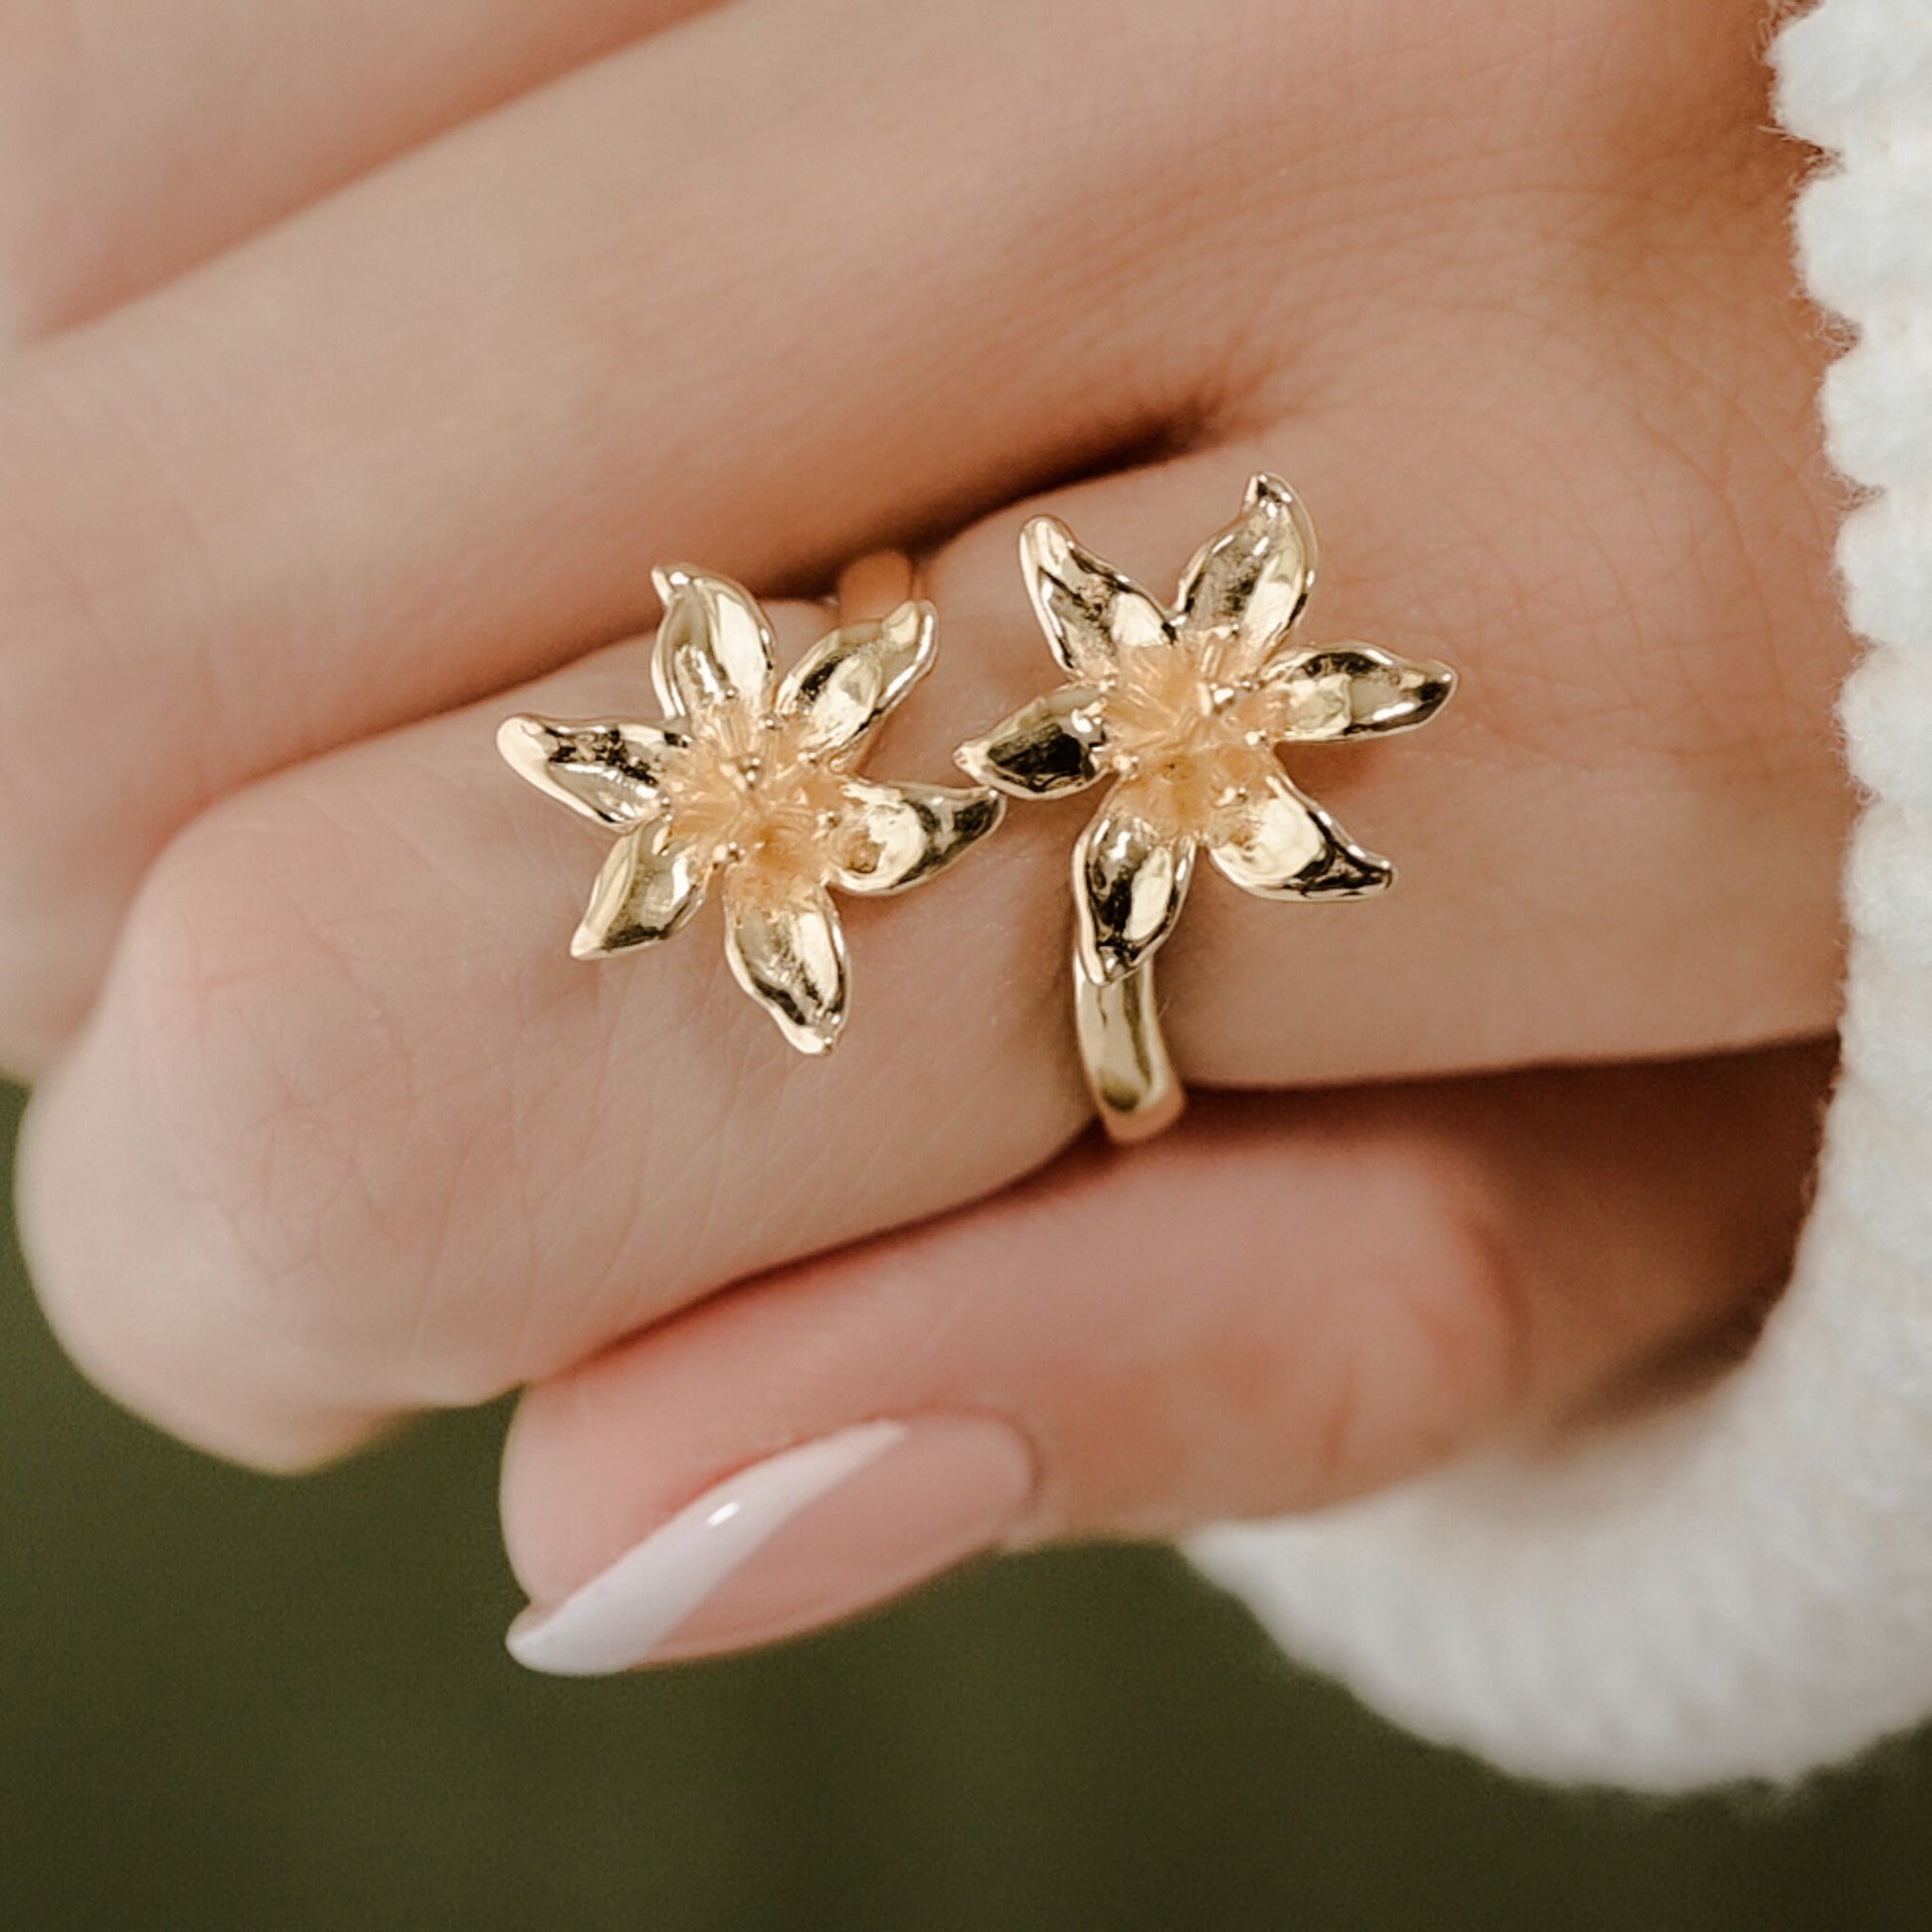 Lily Flower Ring, Adjustable Statment Ring in 14k Yellow Gold, 14k White Gold, 14k Rose Gold